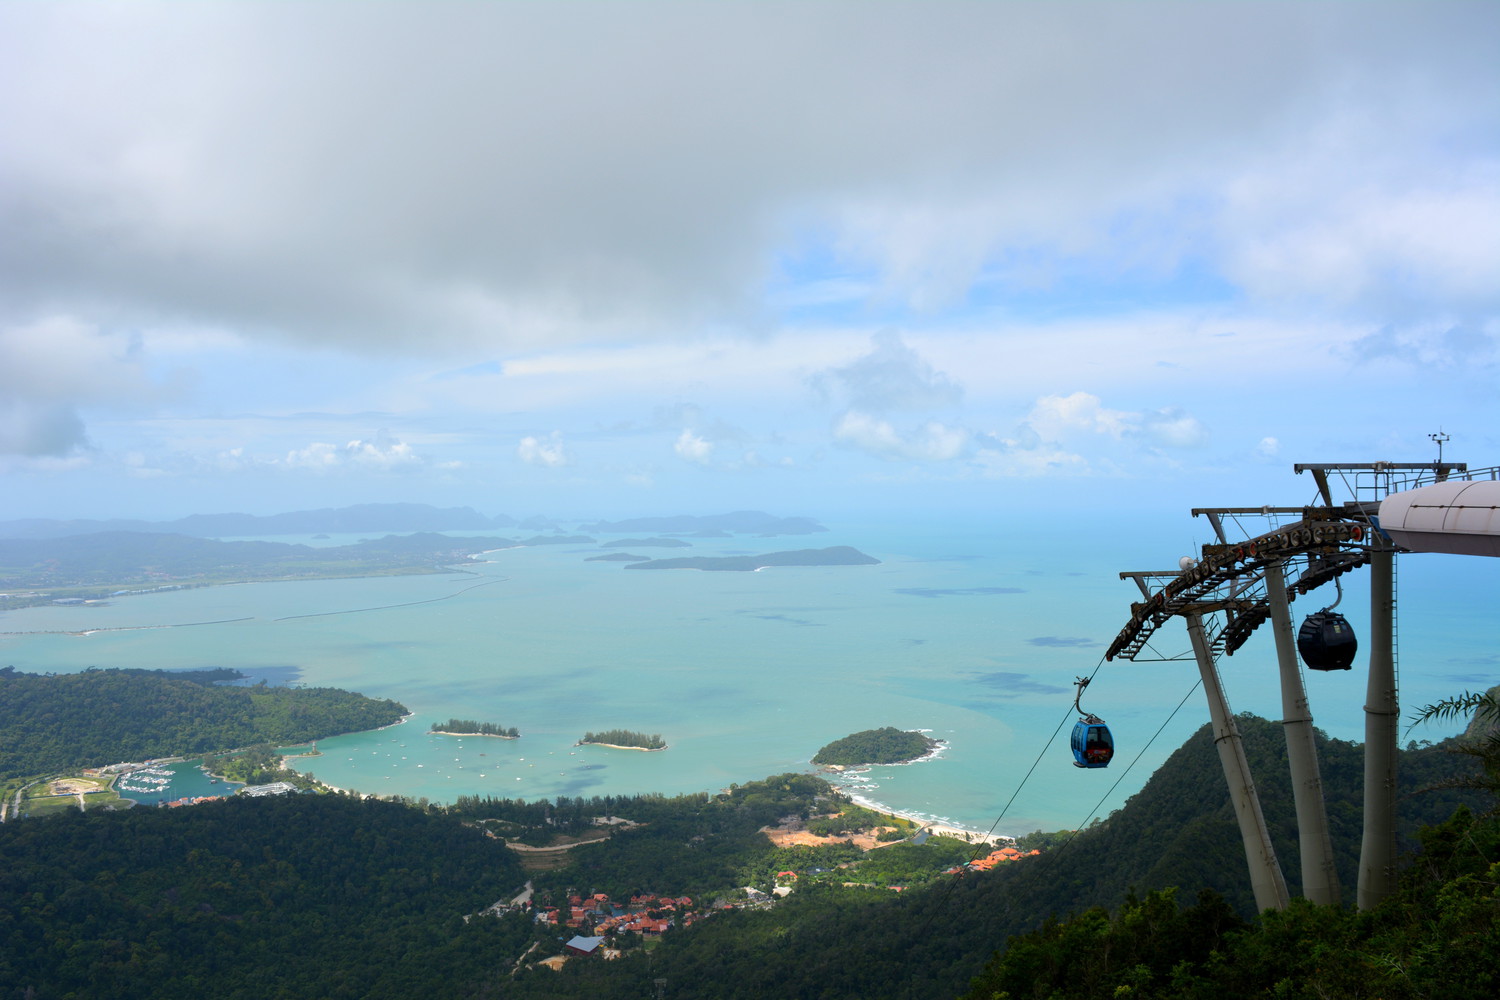 A panaromic view of hills, sea, islands in the sea, and a cable car station from the top of a mountain